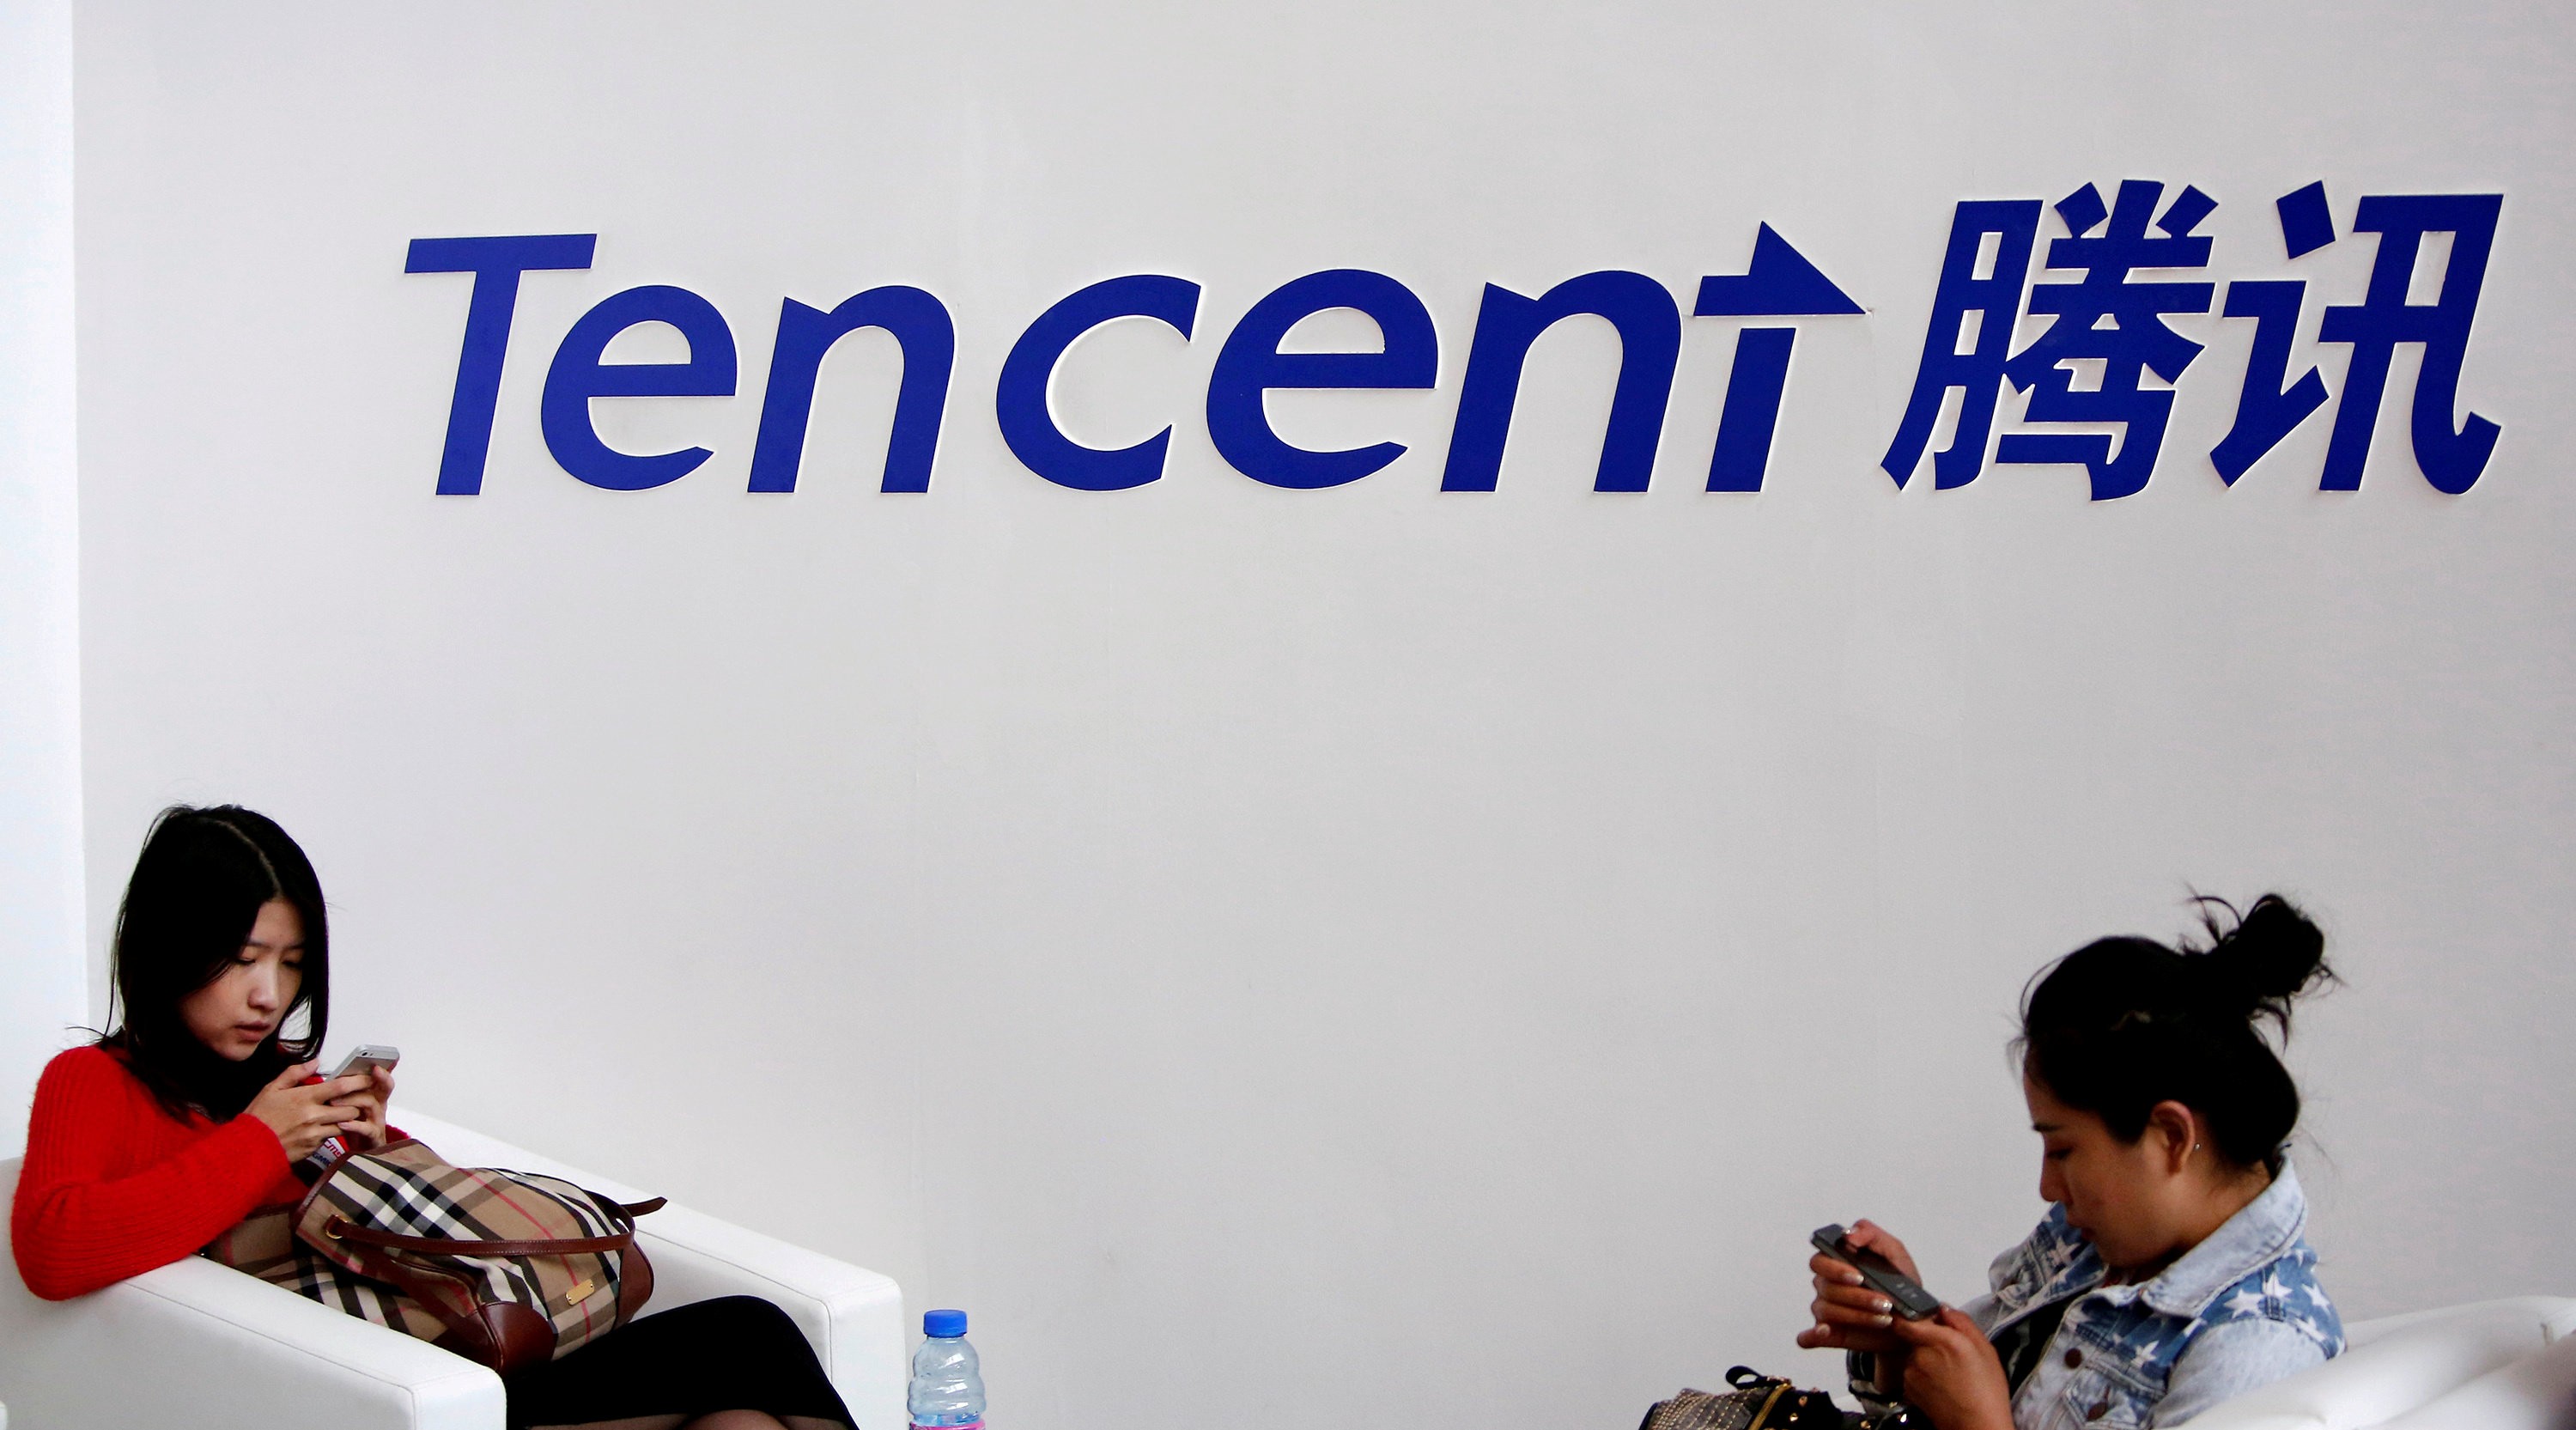 The planned IPO could see Tencent Music valued at between US$29 billion to US$31 billion, according to reports